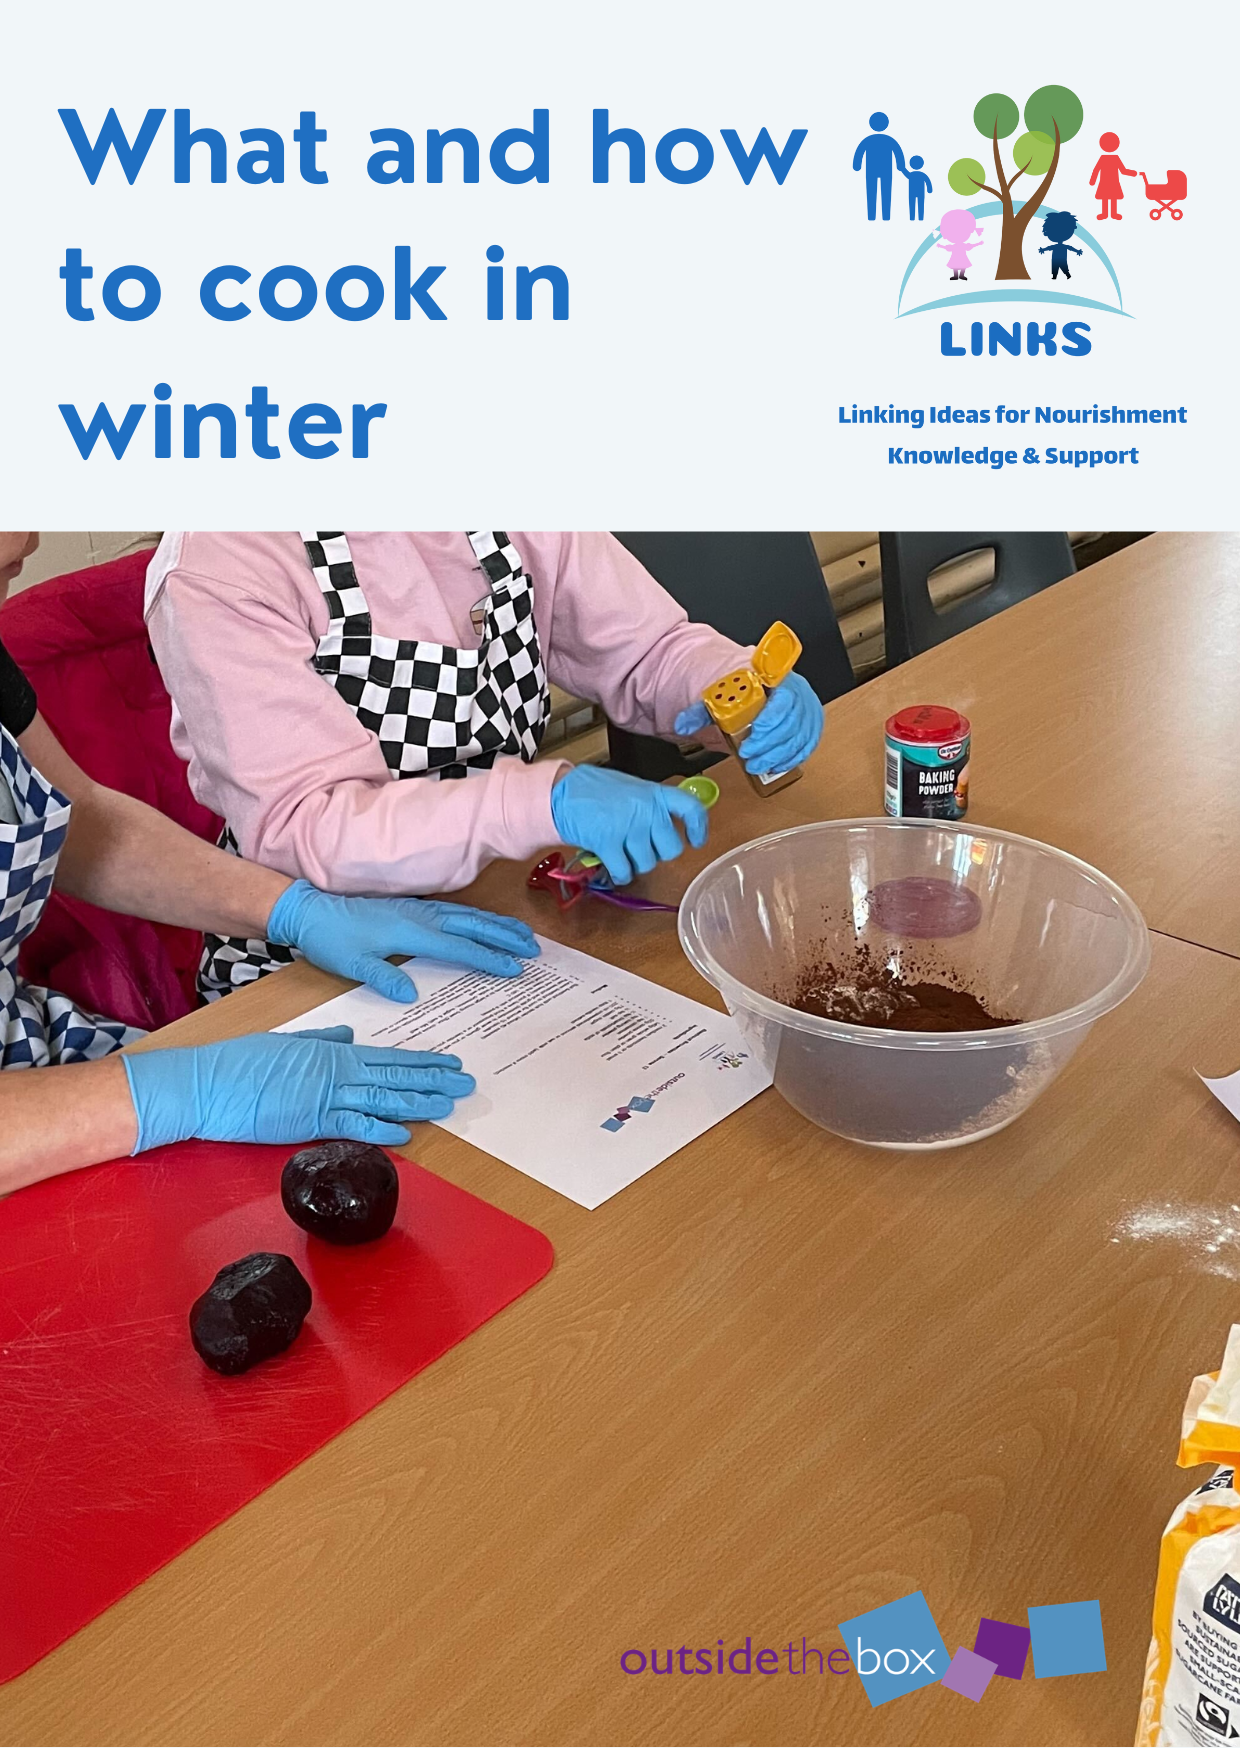 What and how to cook in winter - LINKS